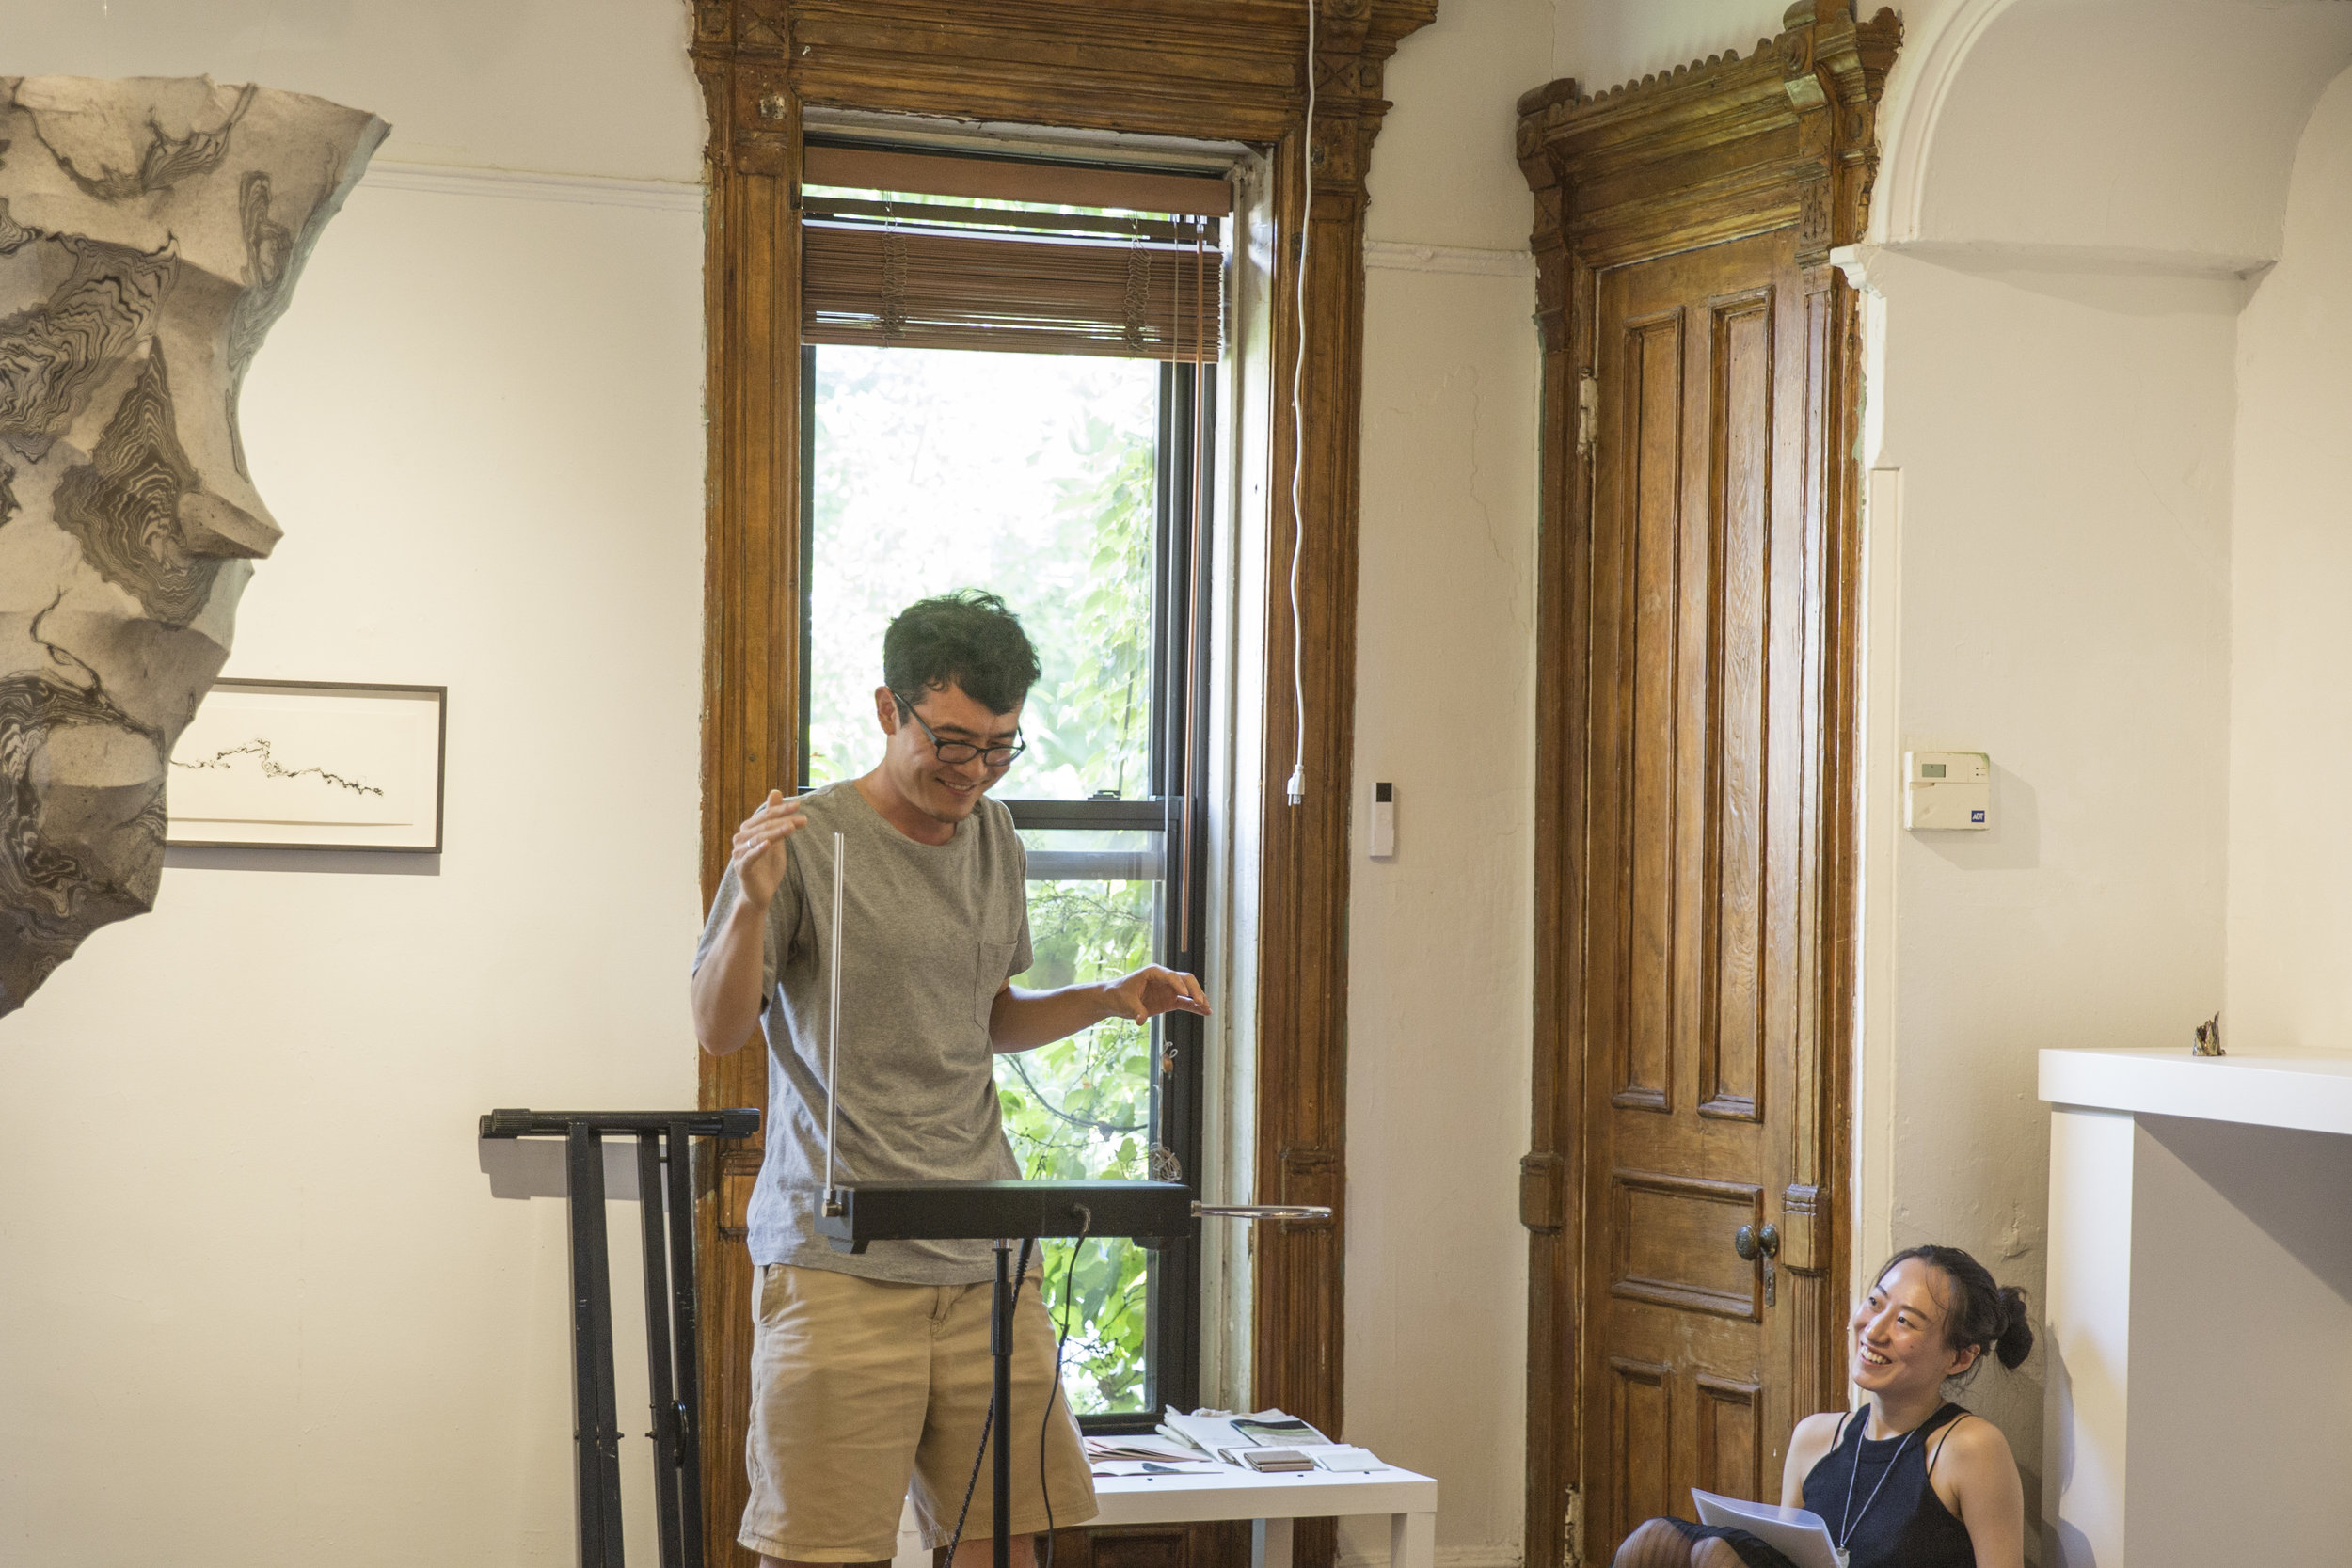  Theremin concert performed by Rafael Carrasquillo, photograph by Jingyao Huang, courtesy Fou Gallery. 